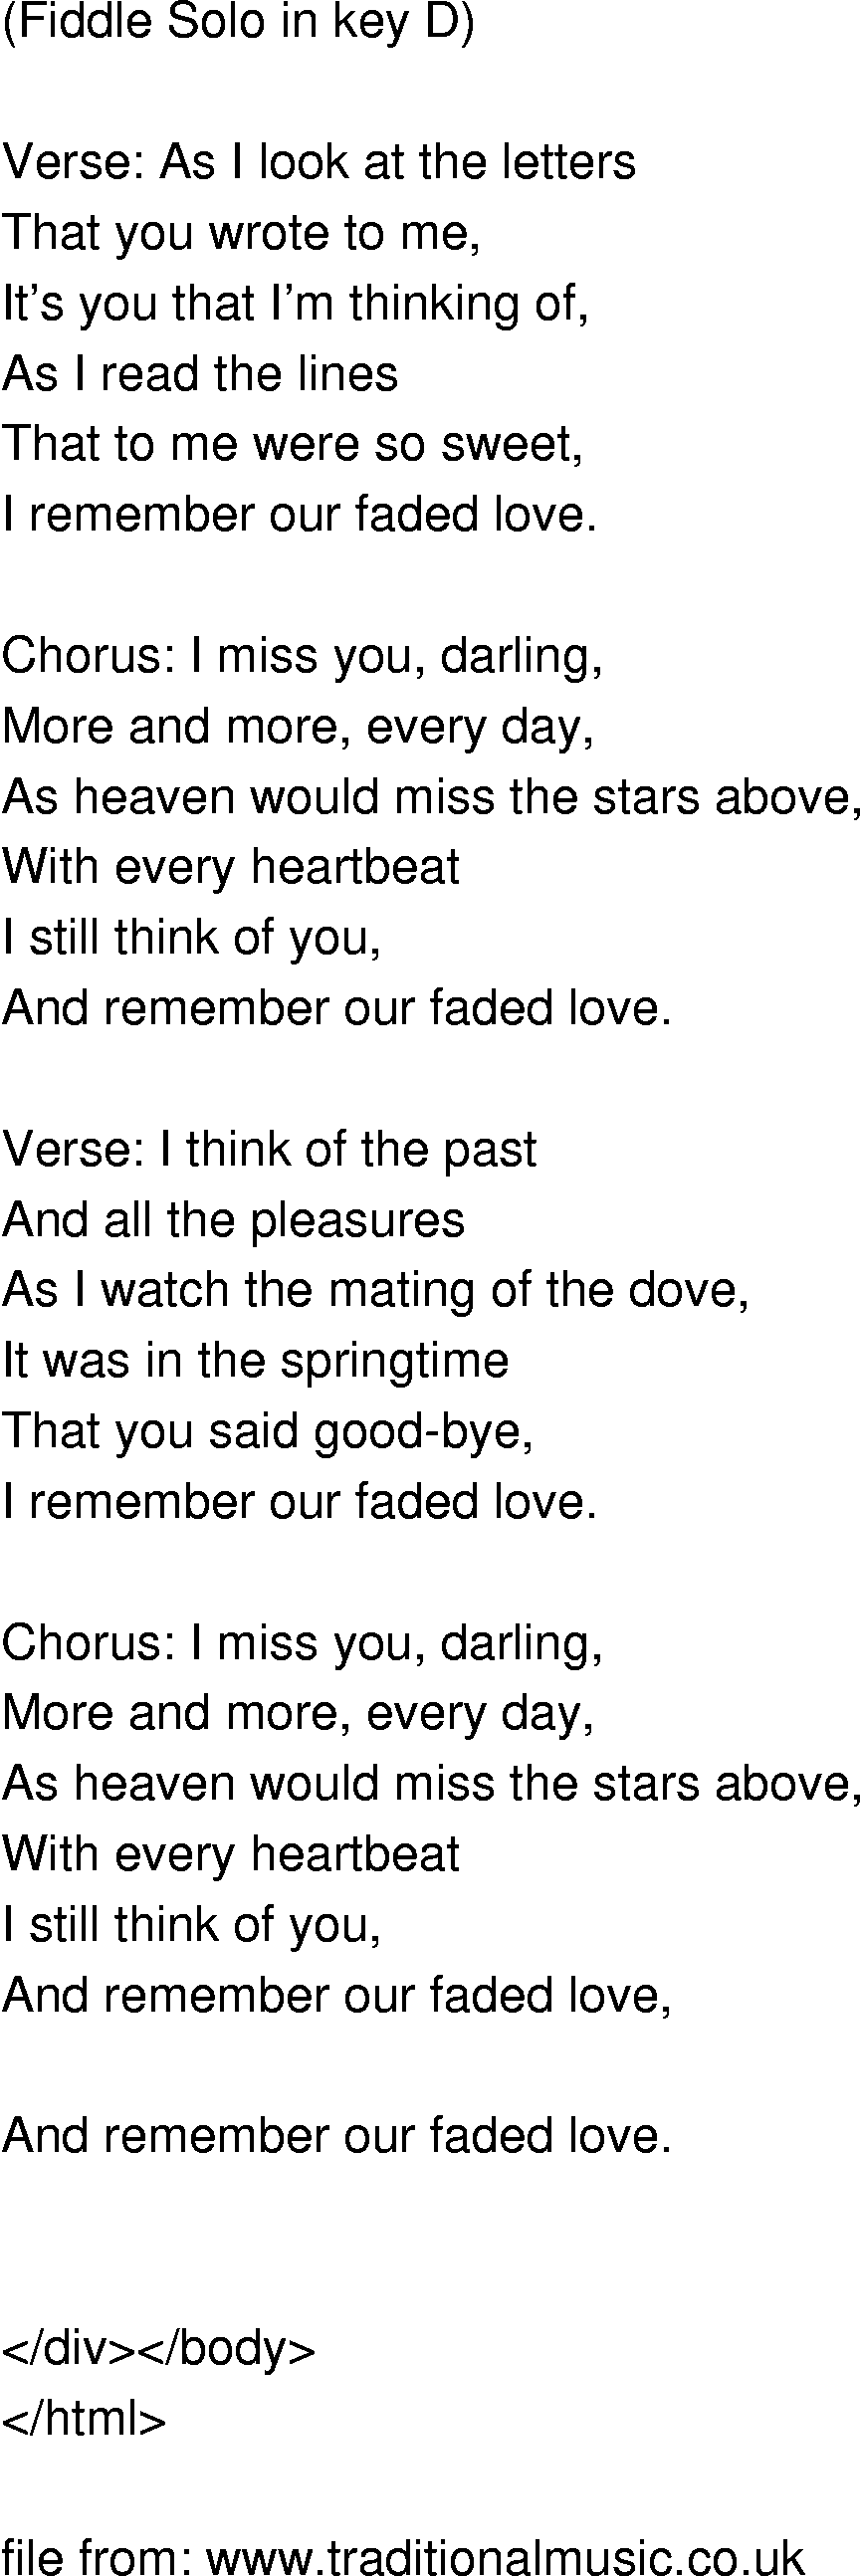 Old-Time (oldtimey) Song Lyrics - faded love